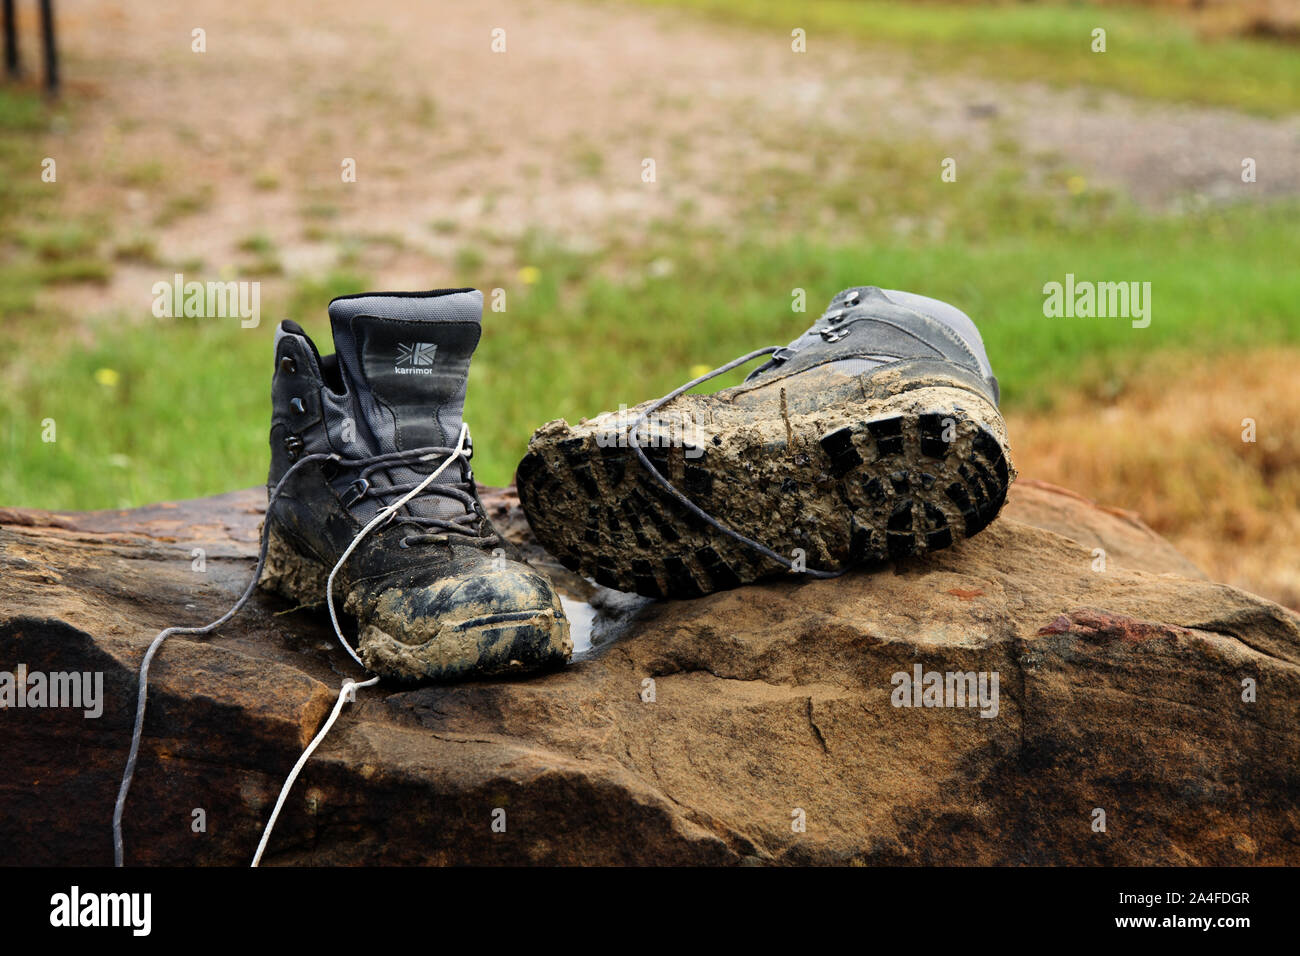 A pair of muddy Karrimor hiking boots on a rock in wet weather Stock Photo  - Alamy